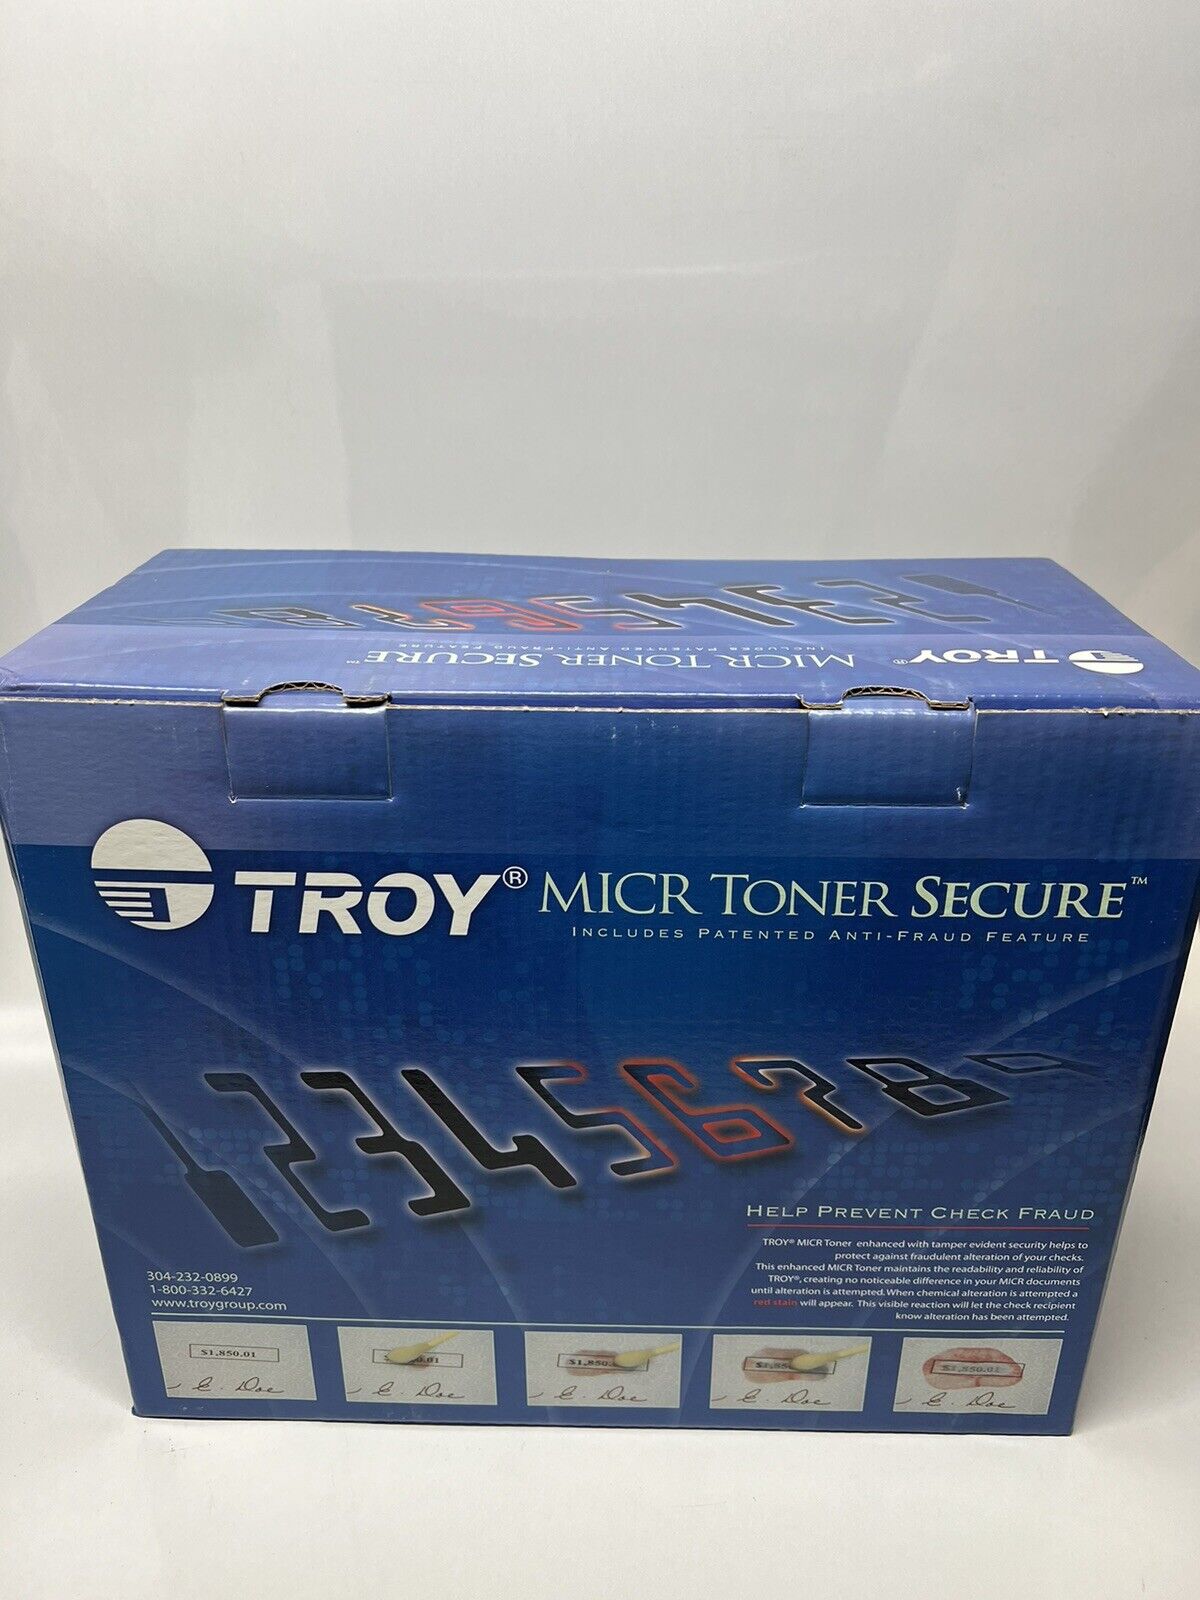 TROY 02-81350-001 Troy Secure Micr Toner New in box